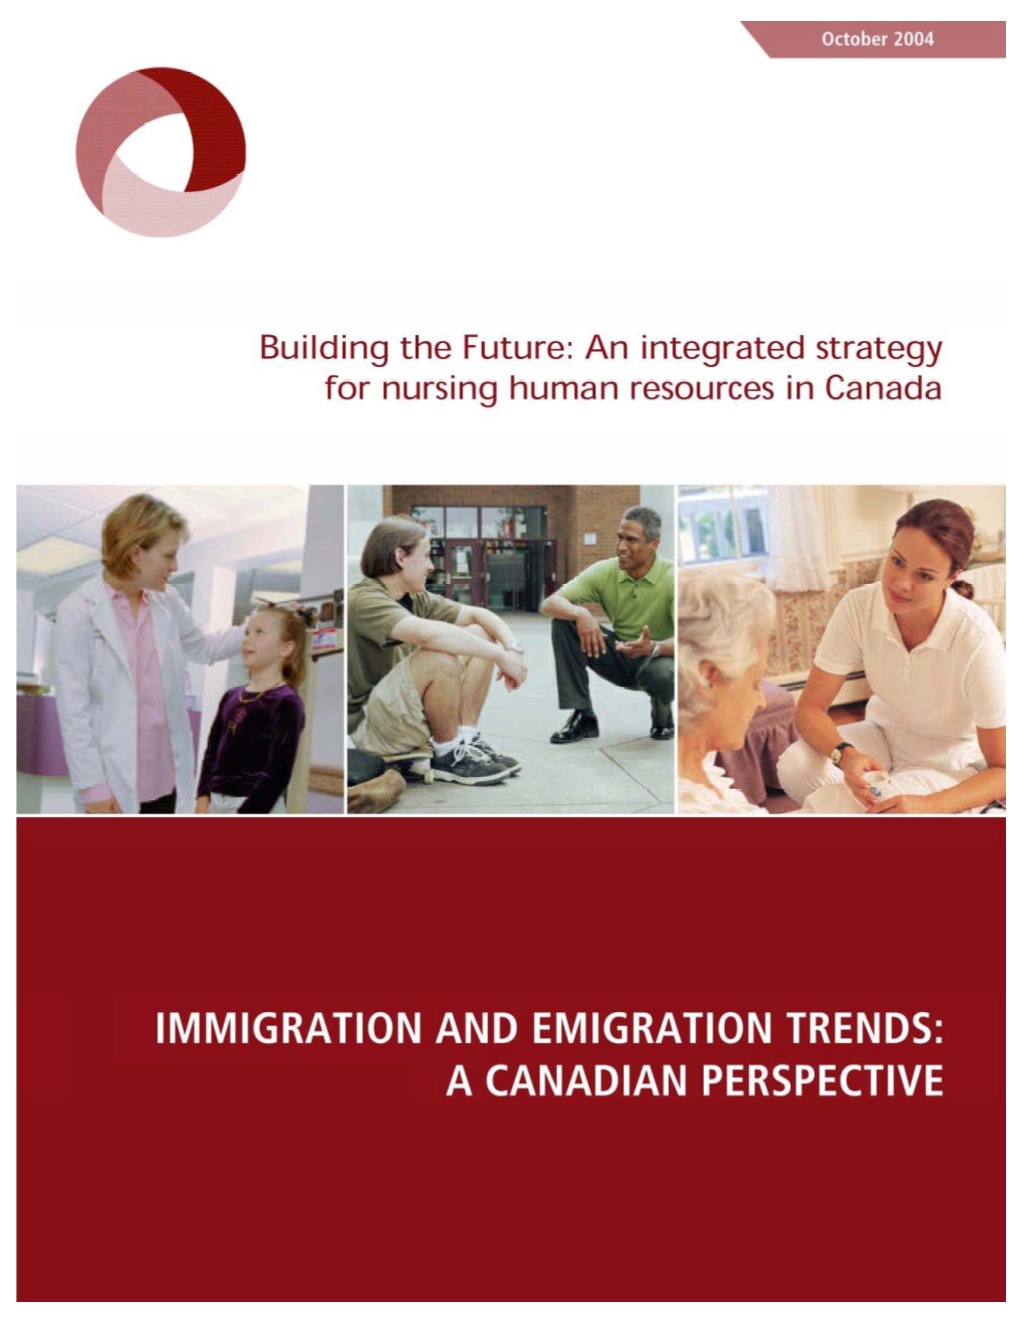 Immigration and Emigration Trends: a Canadian Perspective